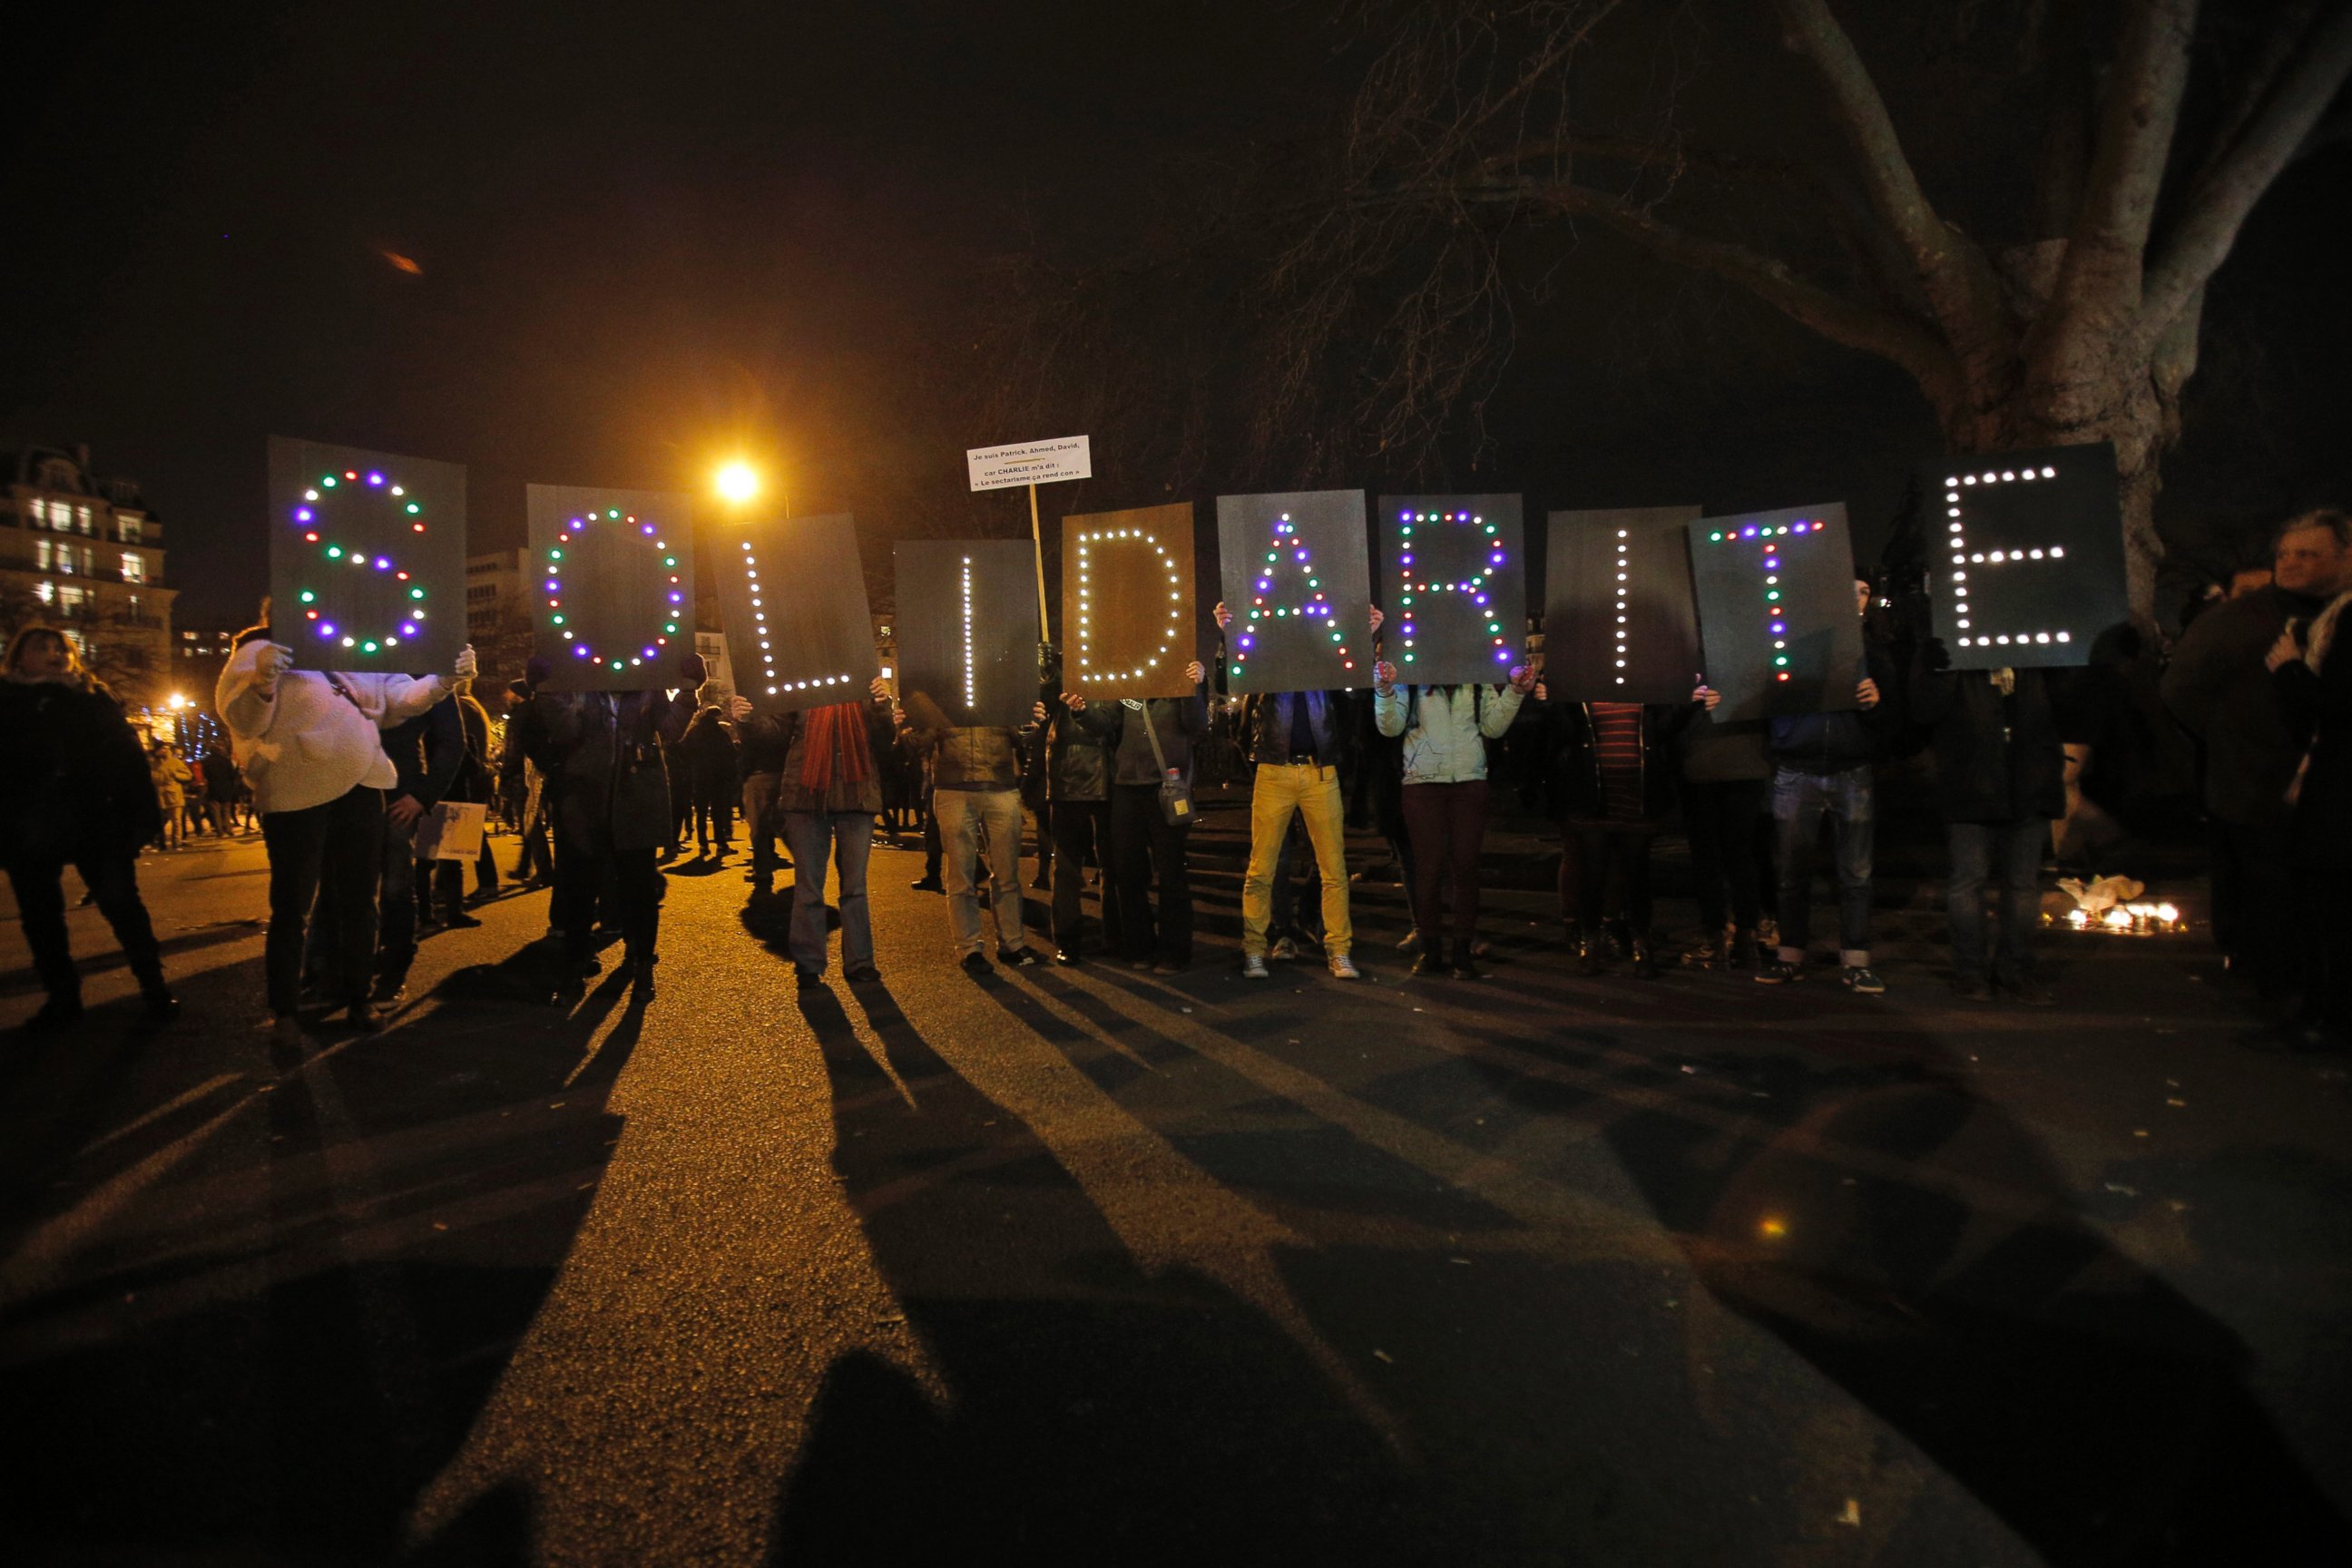 PHOTO: People hold up a sign reading "Solidarity" during a rally in Paris, France, Sunday, Jan. 11, 2015.